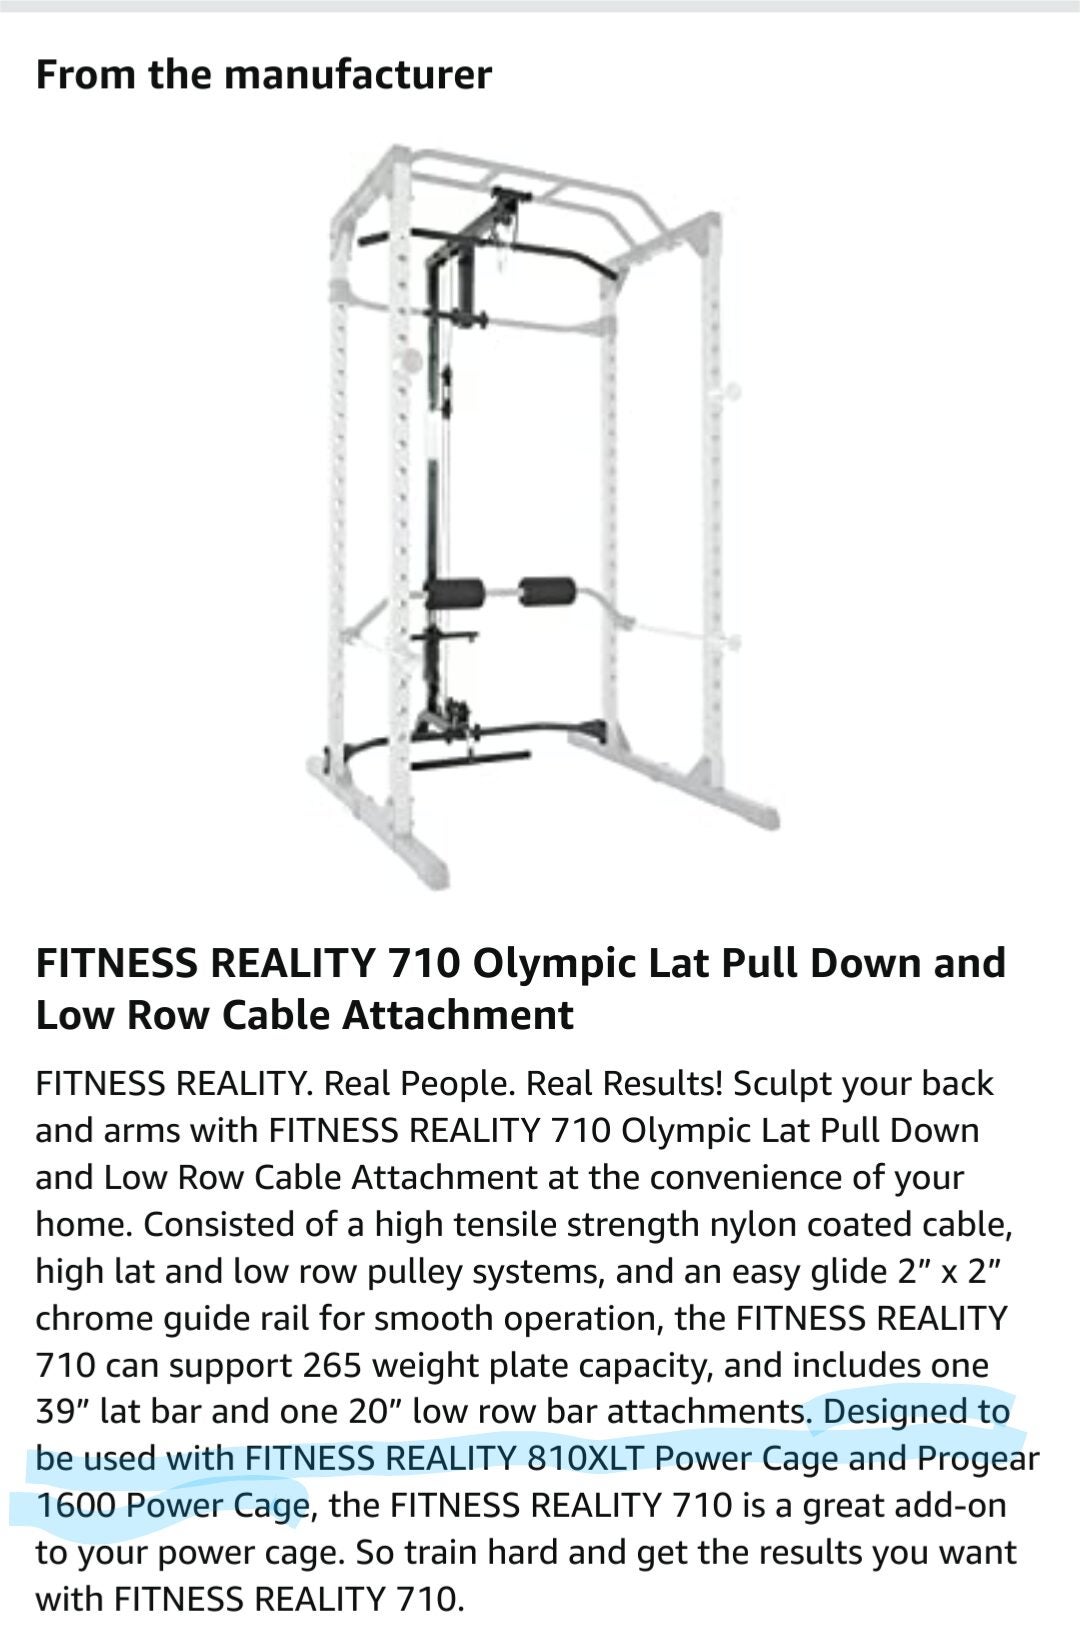 .ca] [Prime Day] Fitness Reality Squat Rack Lat Pull-down Attachment  - 287.20 ATL - Page 2 - RedFlagDeals.com Forums